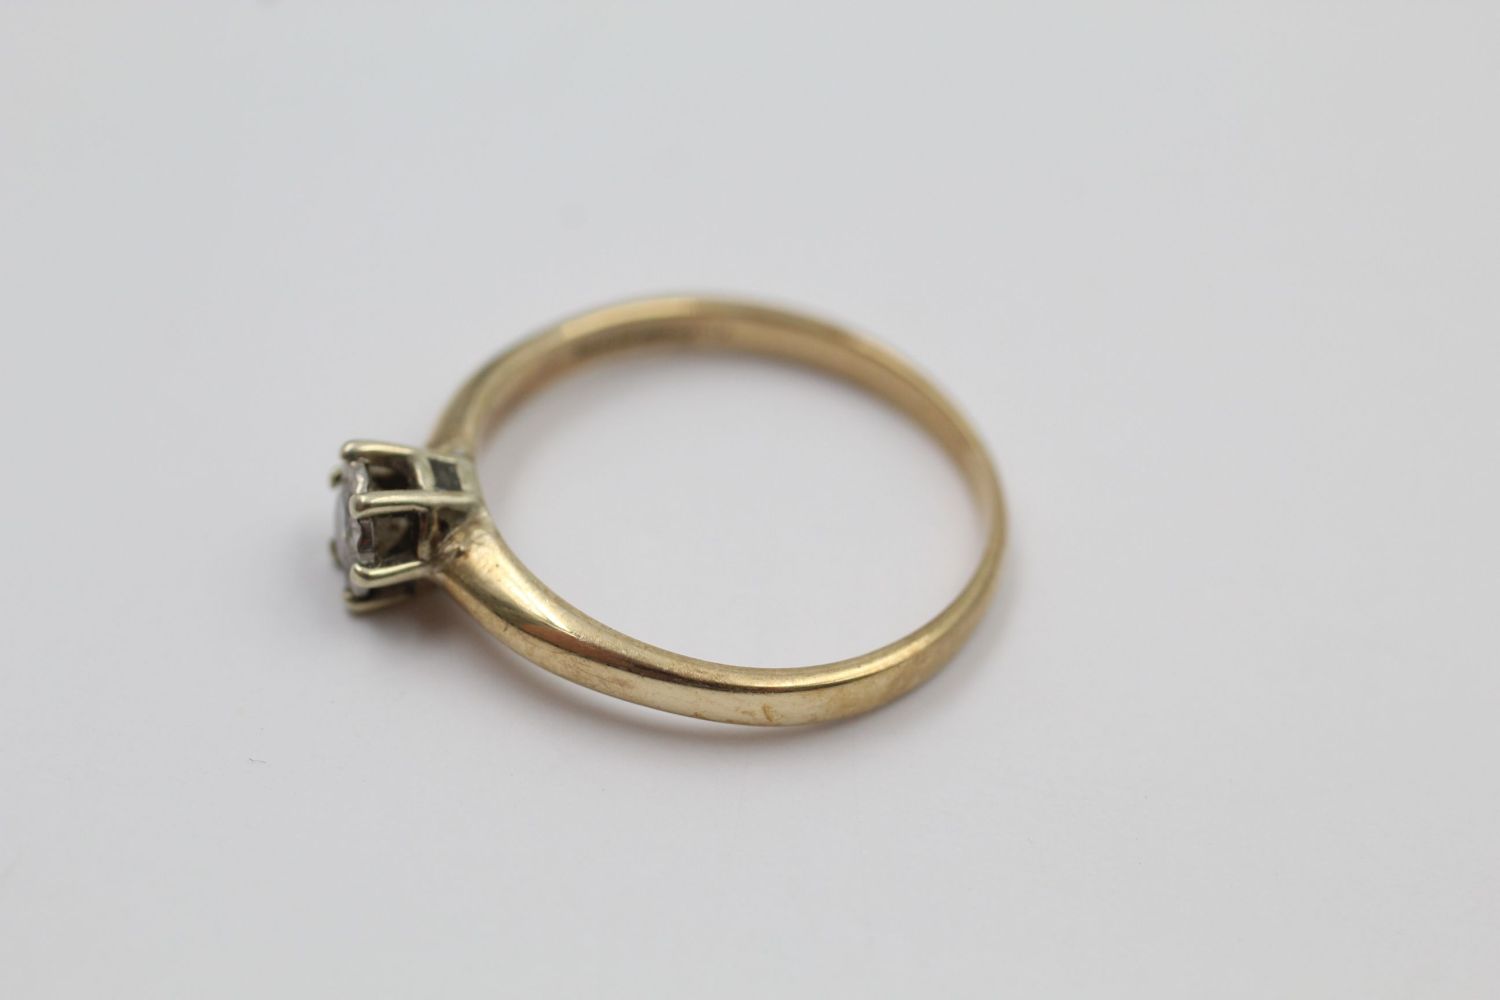 9ct Gold solitaire diamond ring 2 grams gross - Image 2 of 4